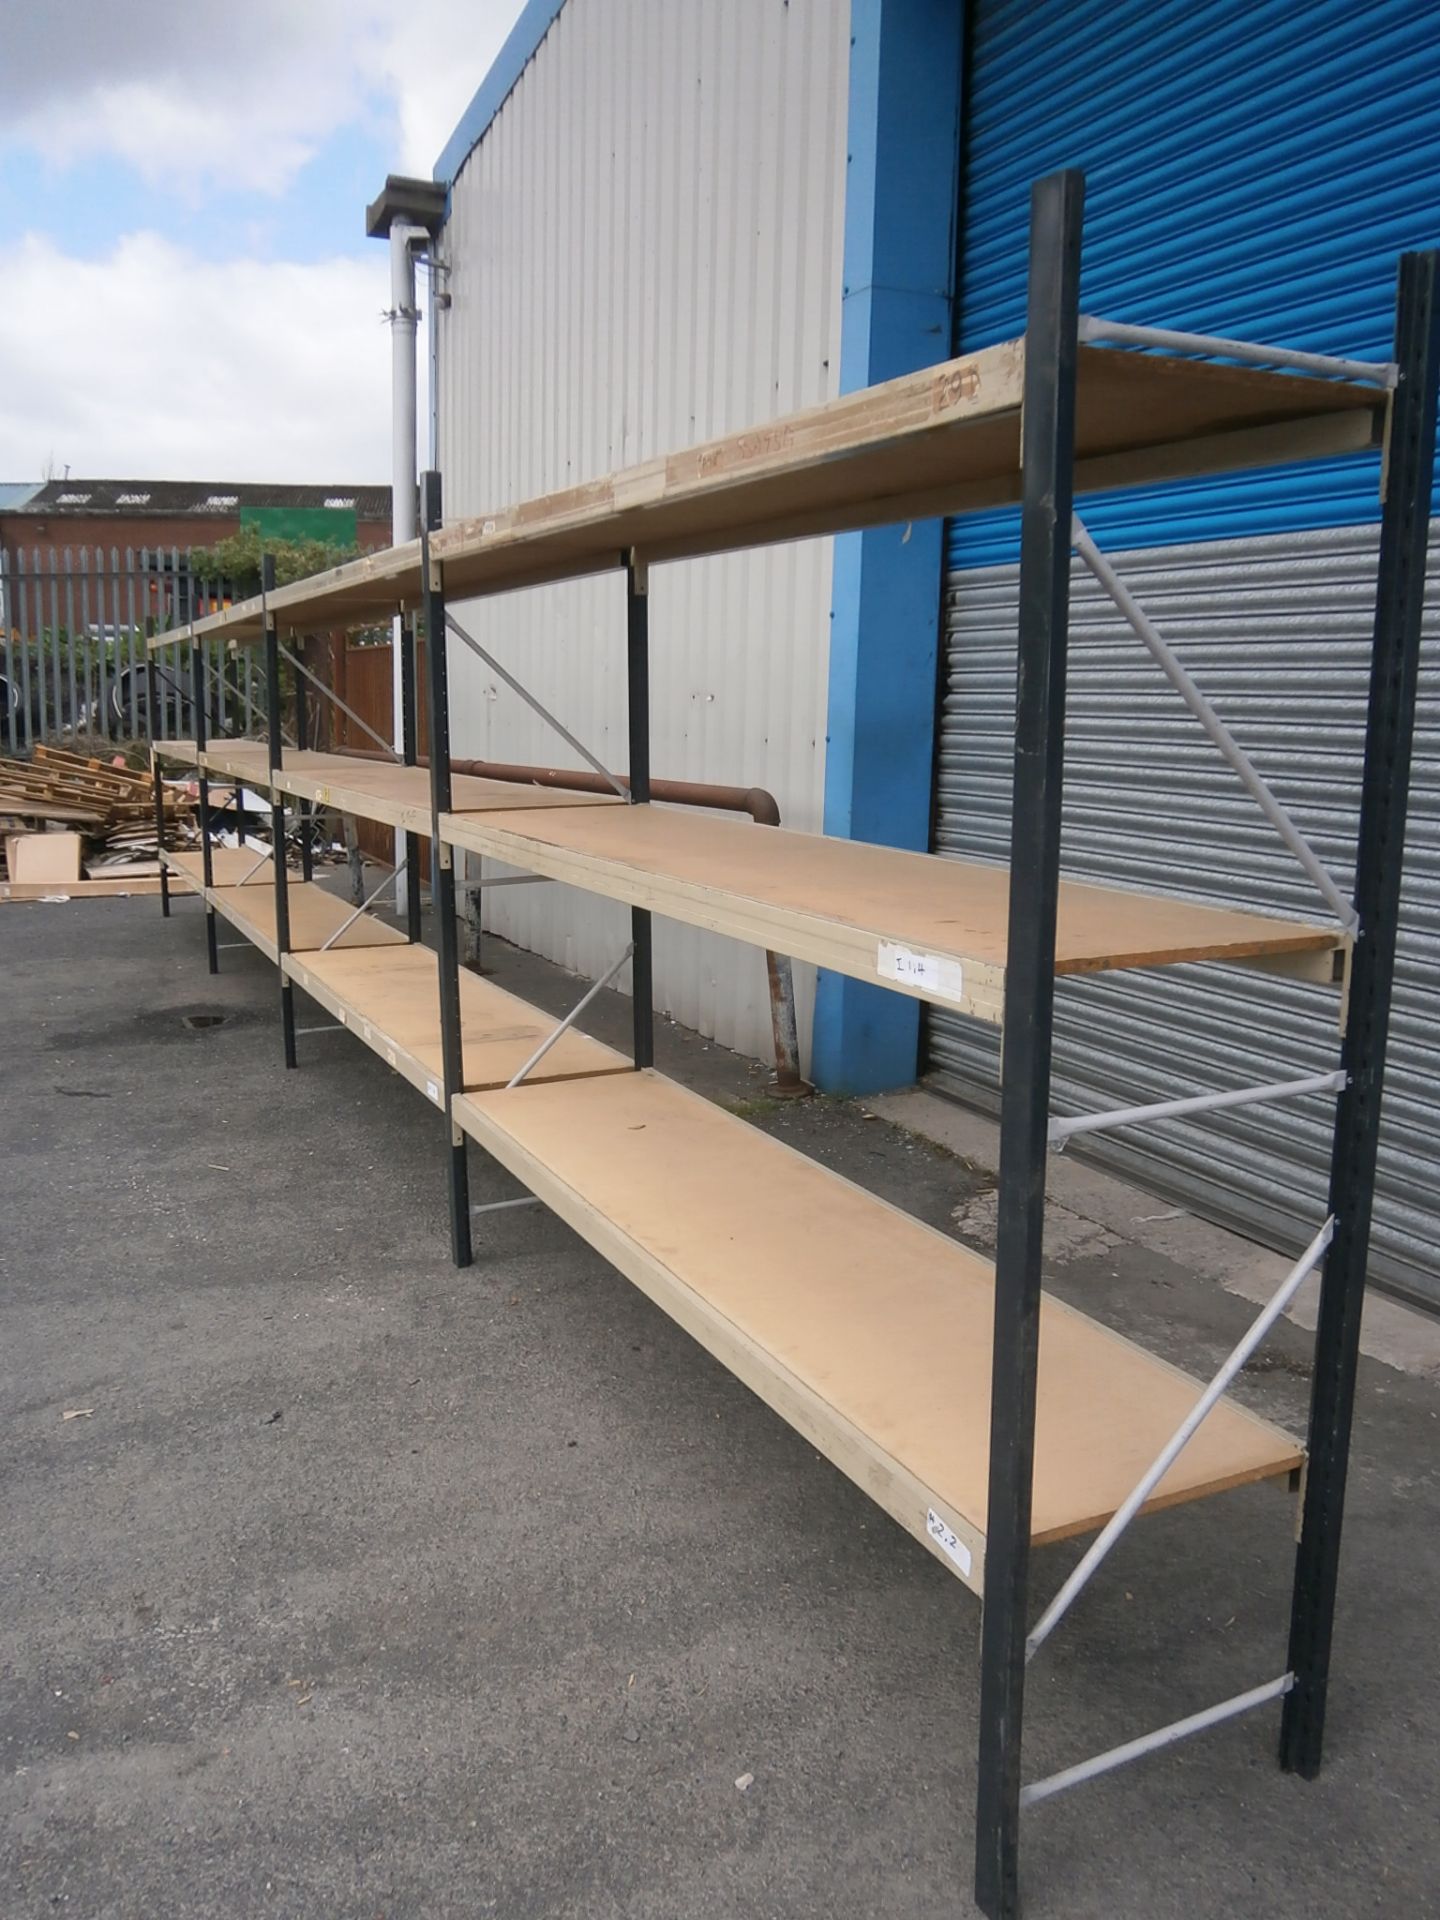 4 x Bays of Commercial Racking - Includes 5 x Uprights, 24 x Beams and 12 x Boards (H - 2100mm, - Image 3 of 4